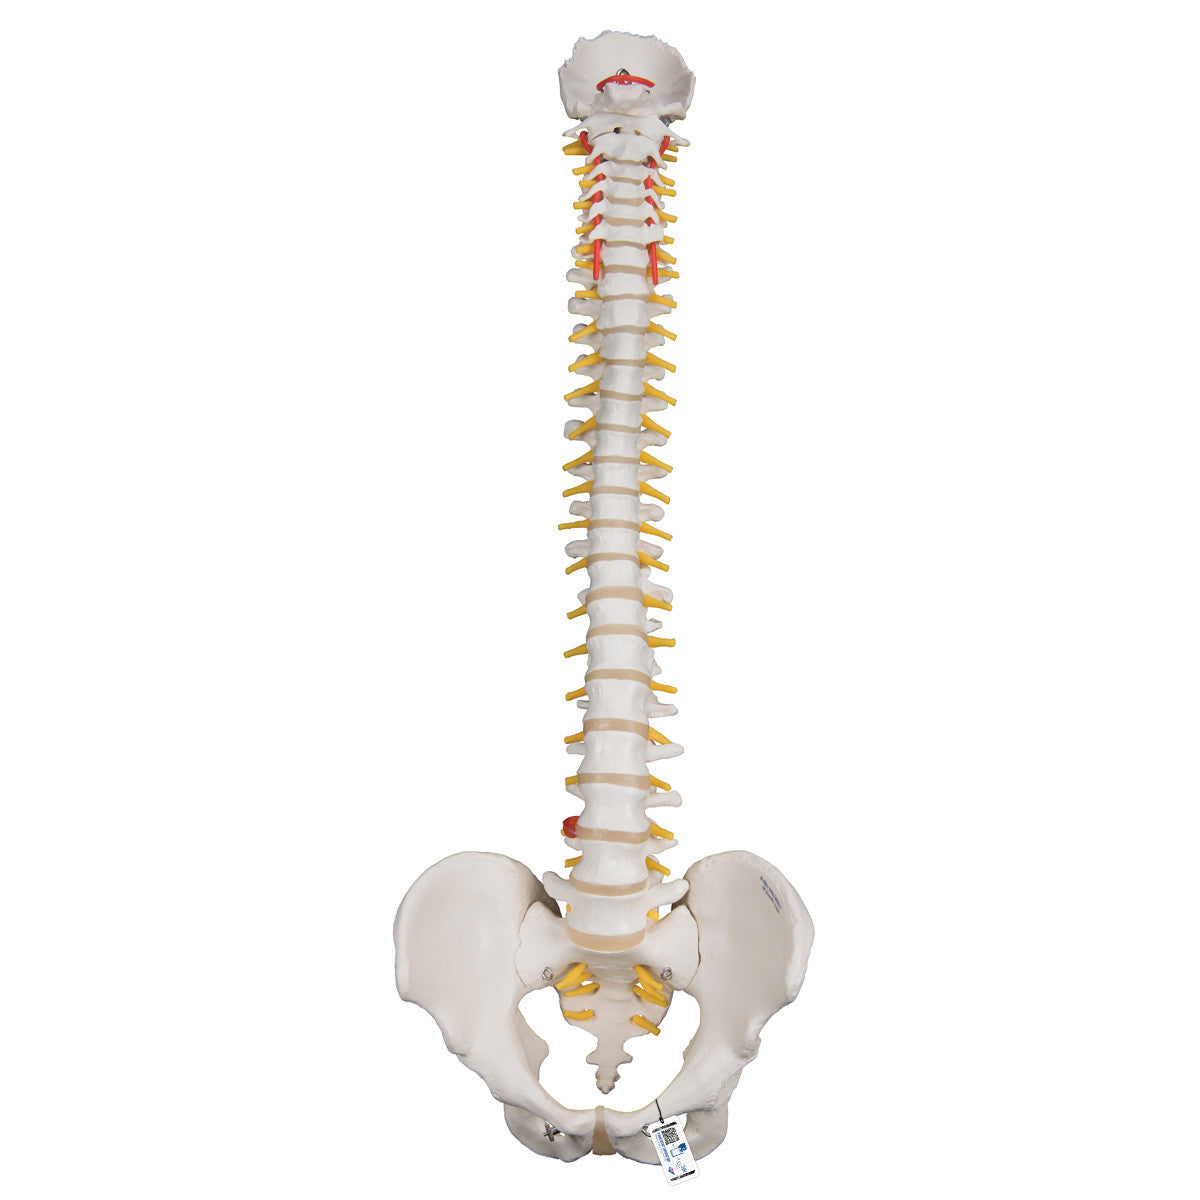 a59-1_01_1200_1200_highly-flexible-human-spine-model-mounted-on-a-flexible-core-3b-smart-anatomy__83840.1589752959.1280.1280.jpg